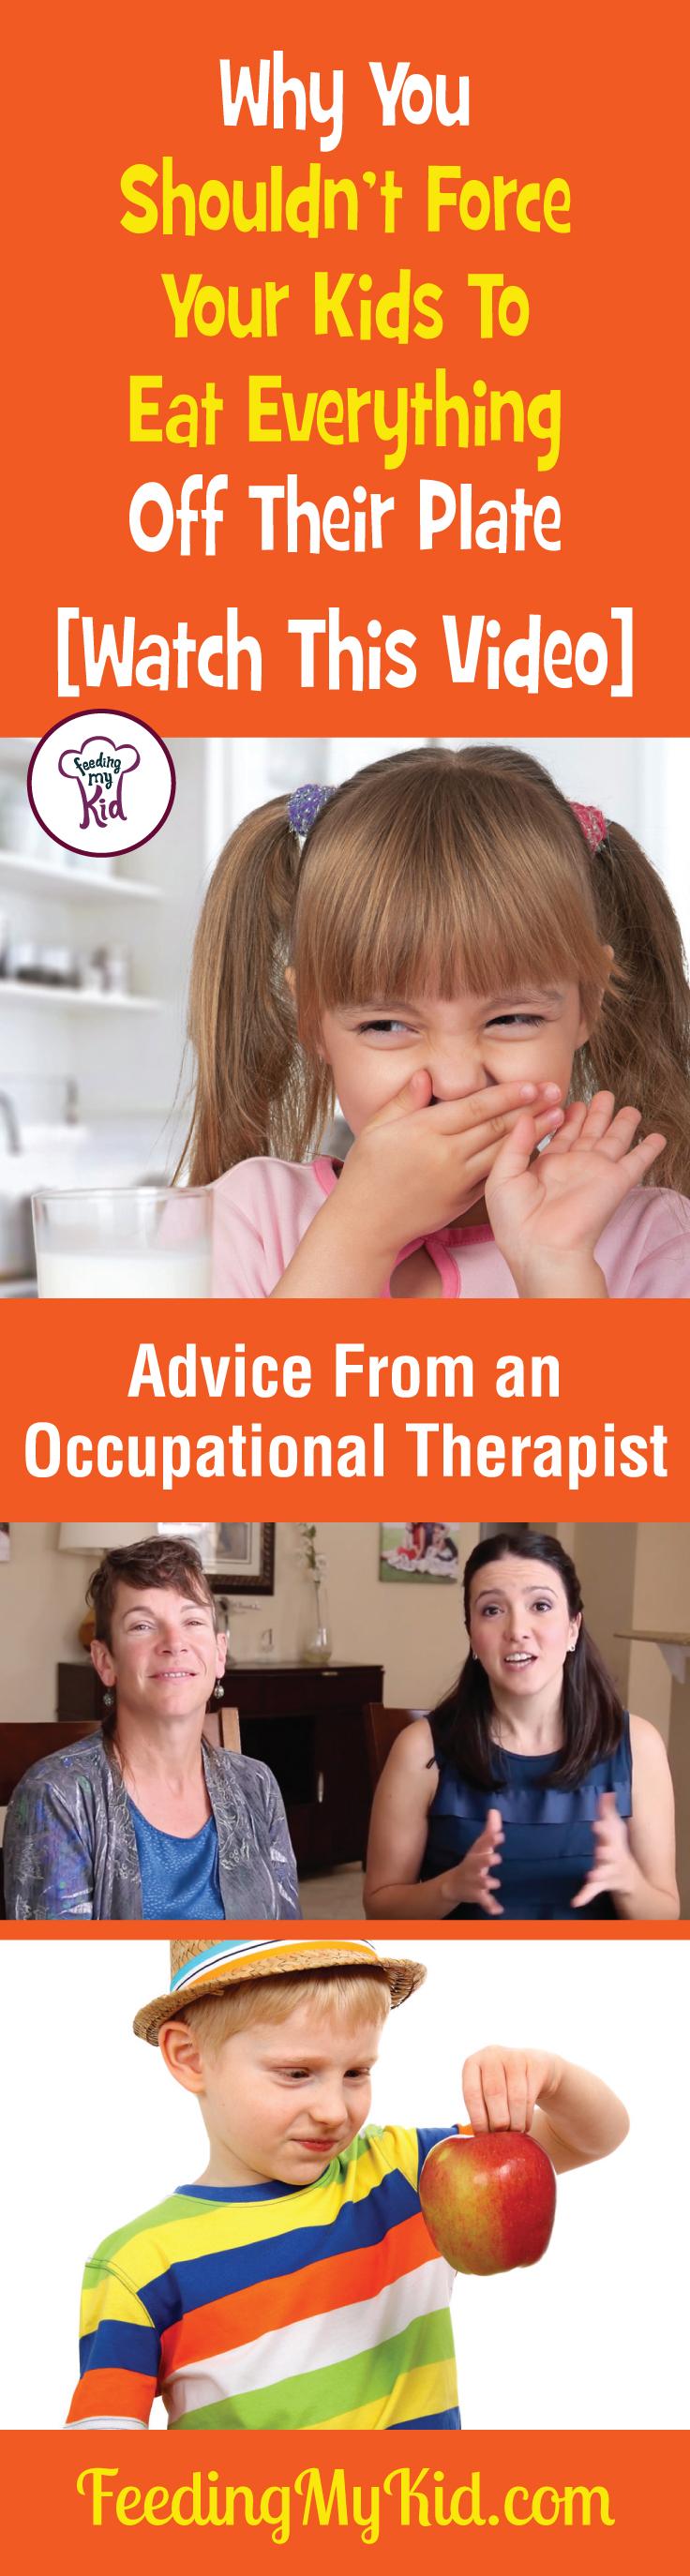 Some great parenting tips and advice from an occupational therapist. Find out how to get your kids to eat without forcing them to eat food off their plate. Feeding My Kid is a filled with all the information you need about how to raise your kids, from healthy tips to nutritious recipes. #FeedingMyKid #OccupationalTherapist #advice #kidshealth #parentingtips